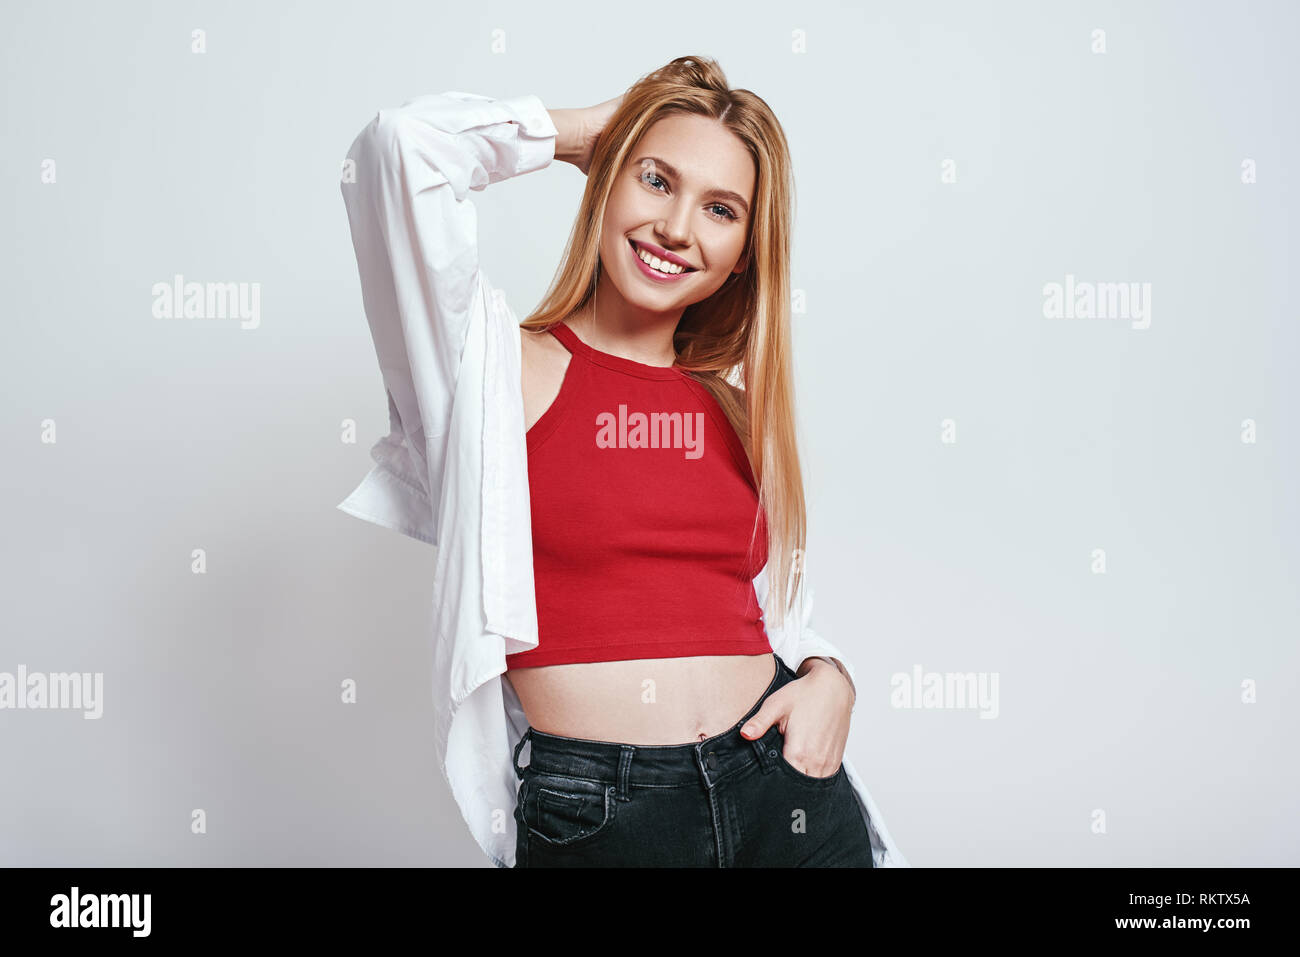 Feeling happy. Attractive young blonde woman in red tank top feeling so excited, smiling and looking at camera. Grey background. Beauty concept Stock Photo